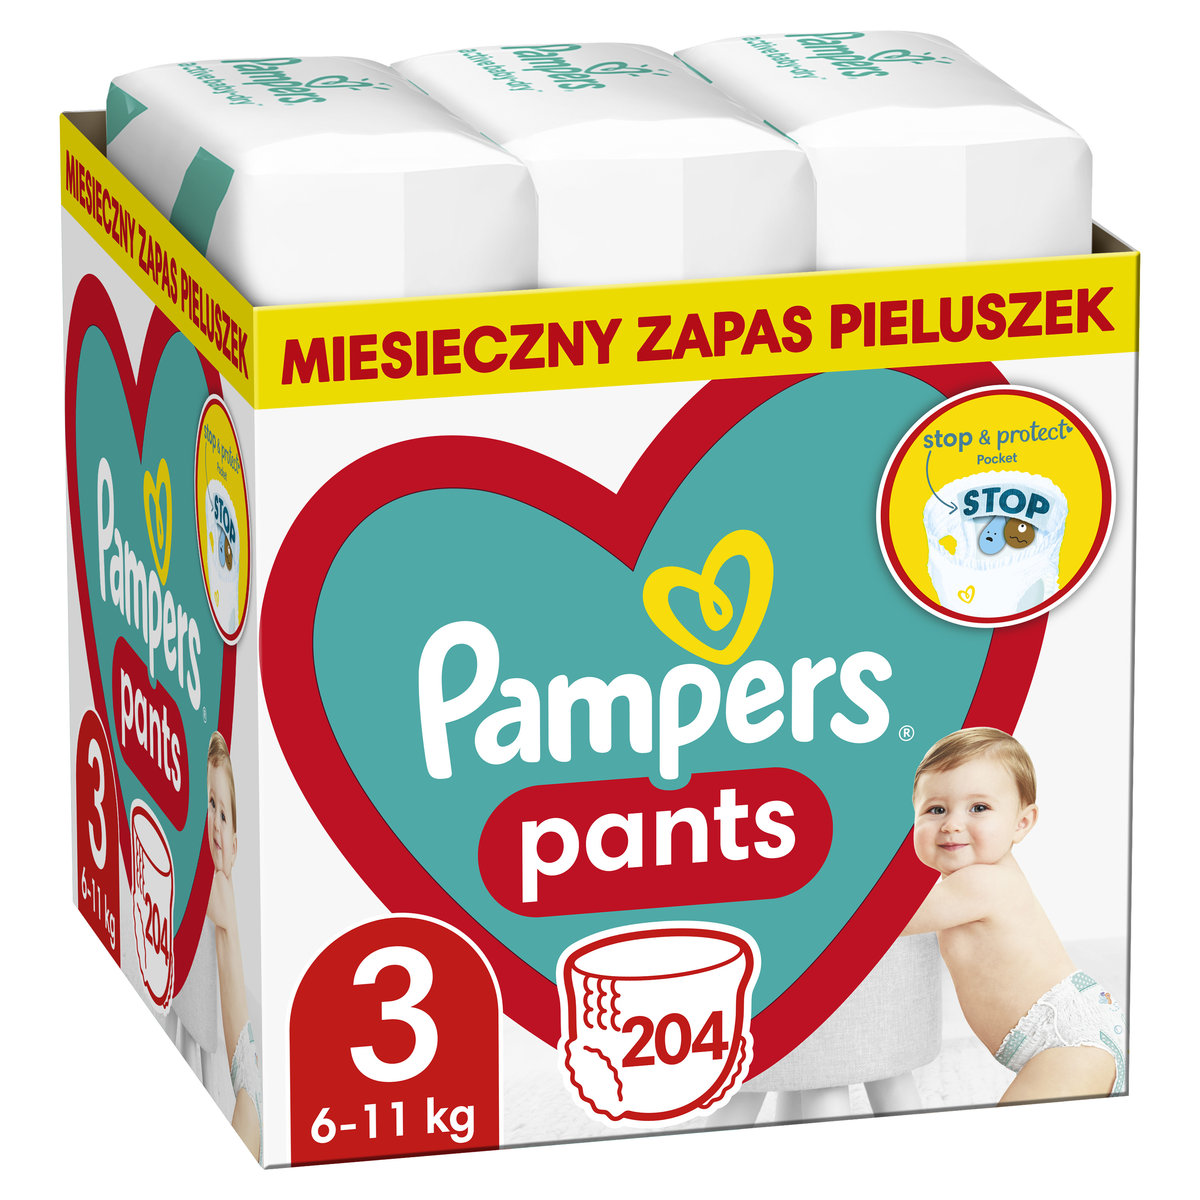 what is the consumption of pampers per month